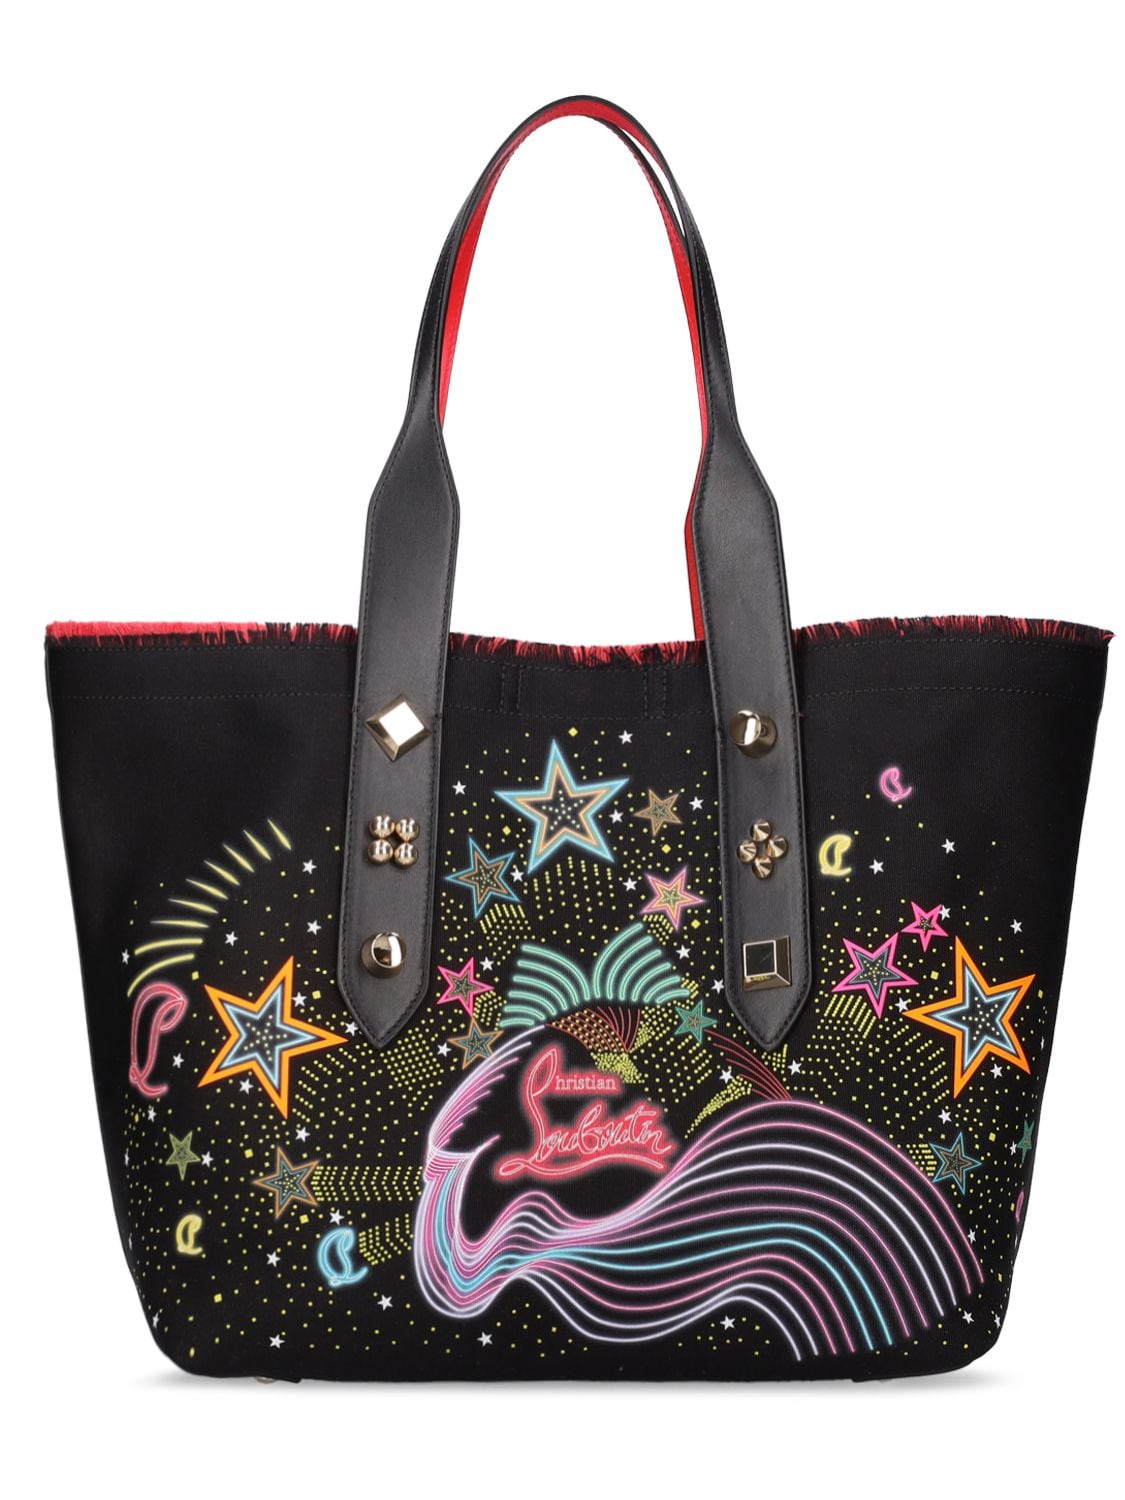 louieloidesign - belle reading Tote Bag by Louie Loi